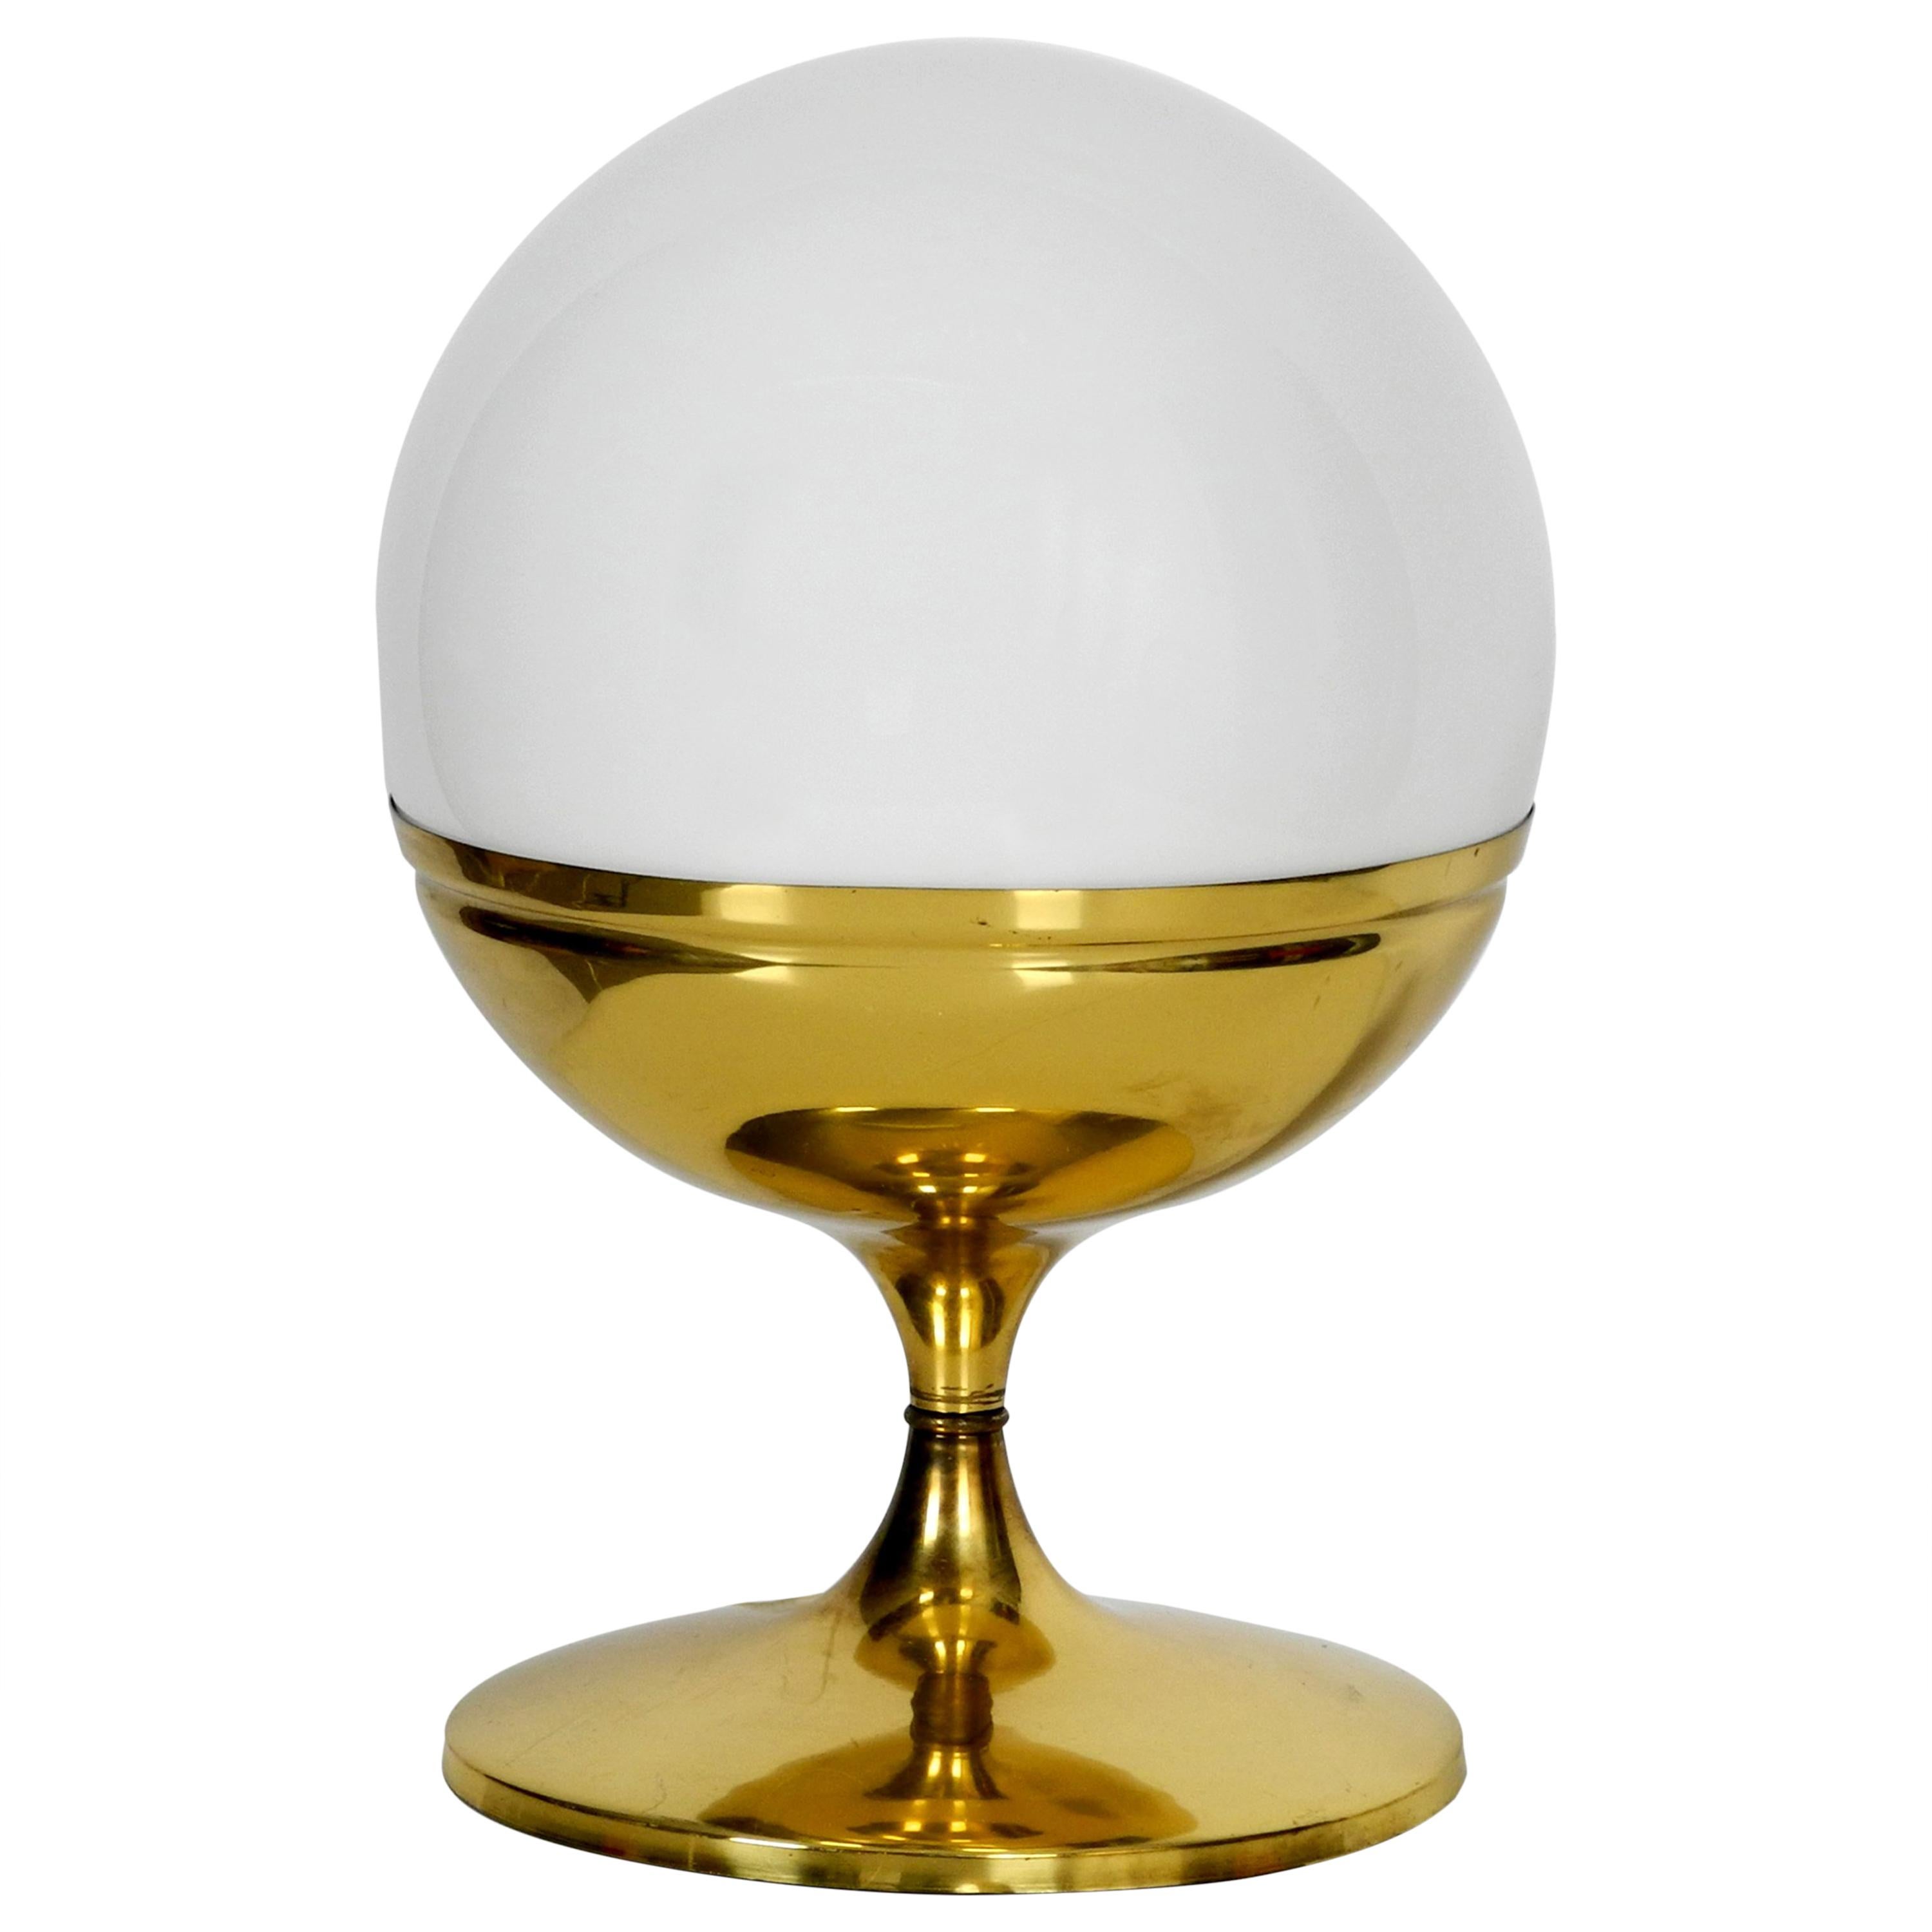 1960s Extra Large Brass Tulip Table Lamp with One Glass Ball Space Age Pop Art